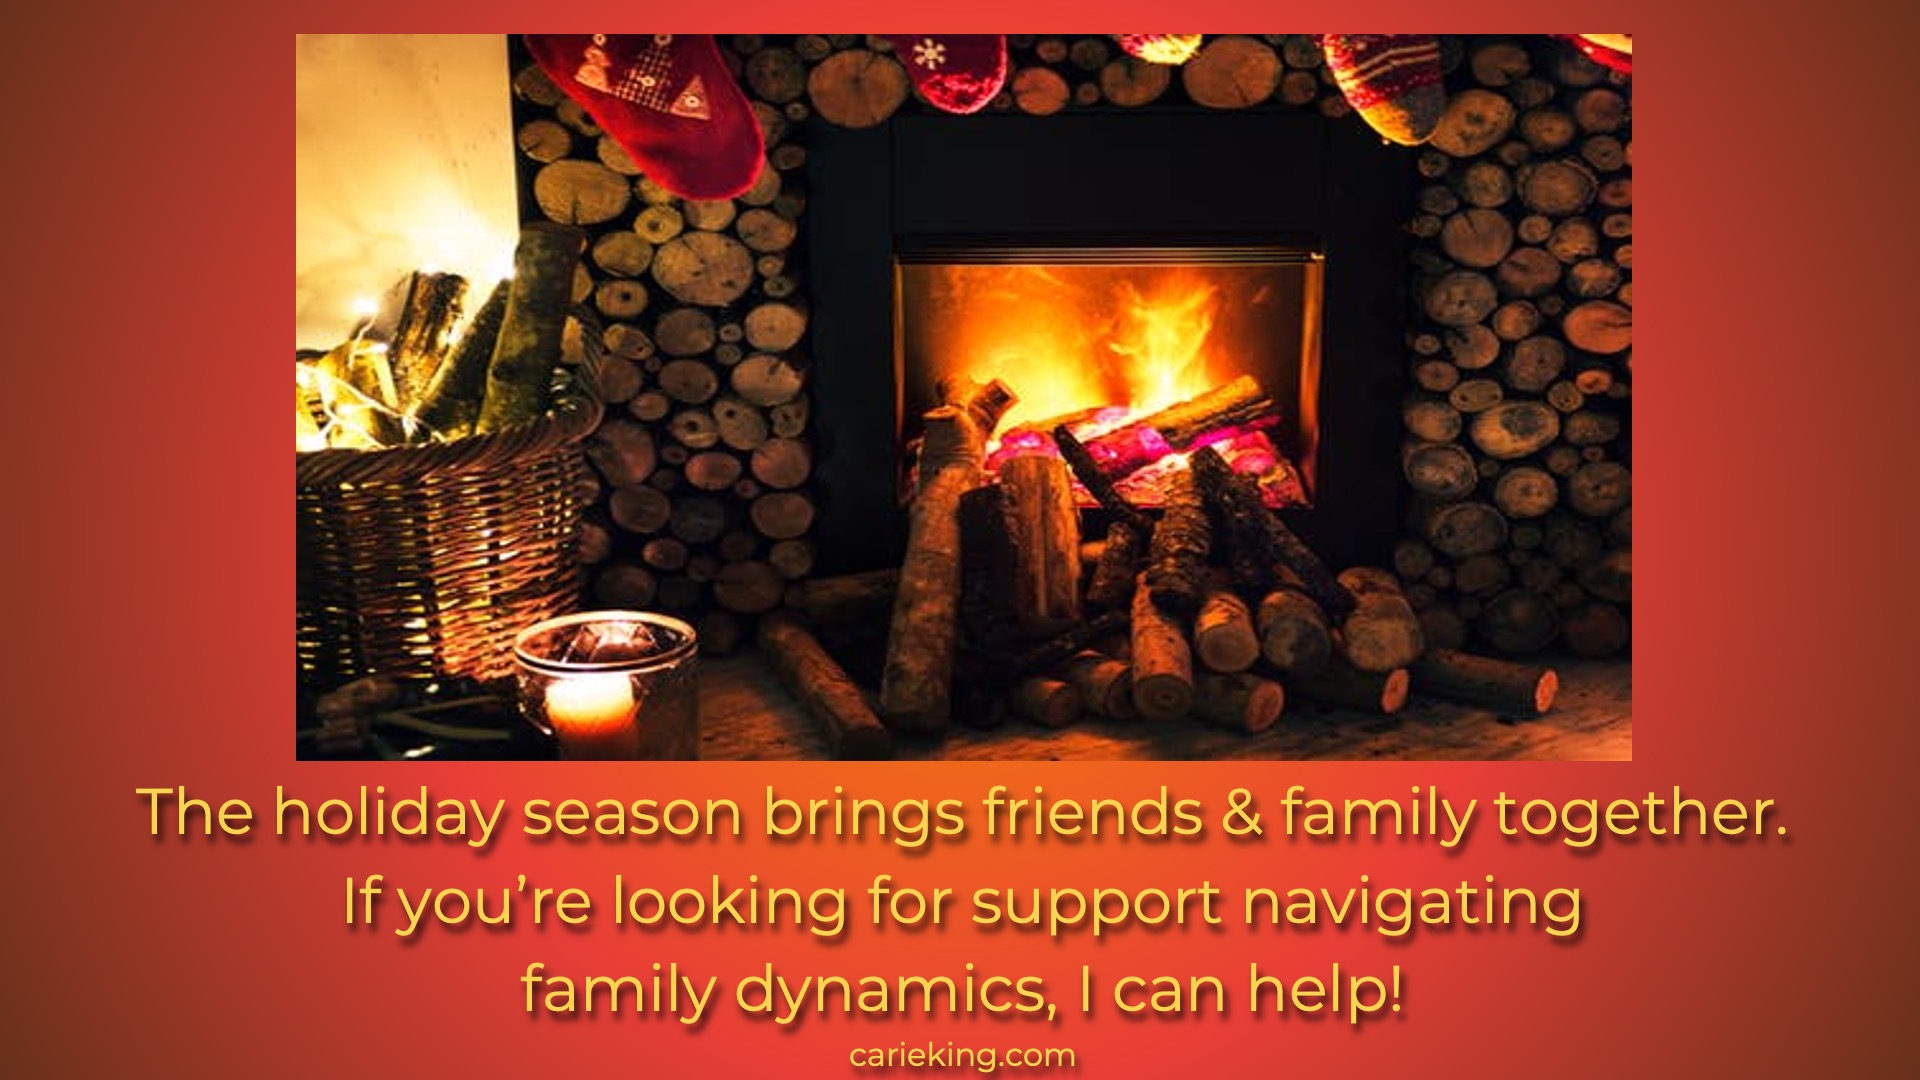 You are currently viewing The holiday season brings friends & family together.